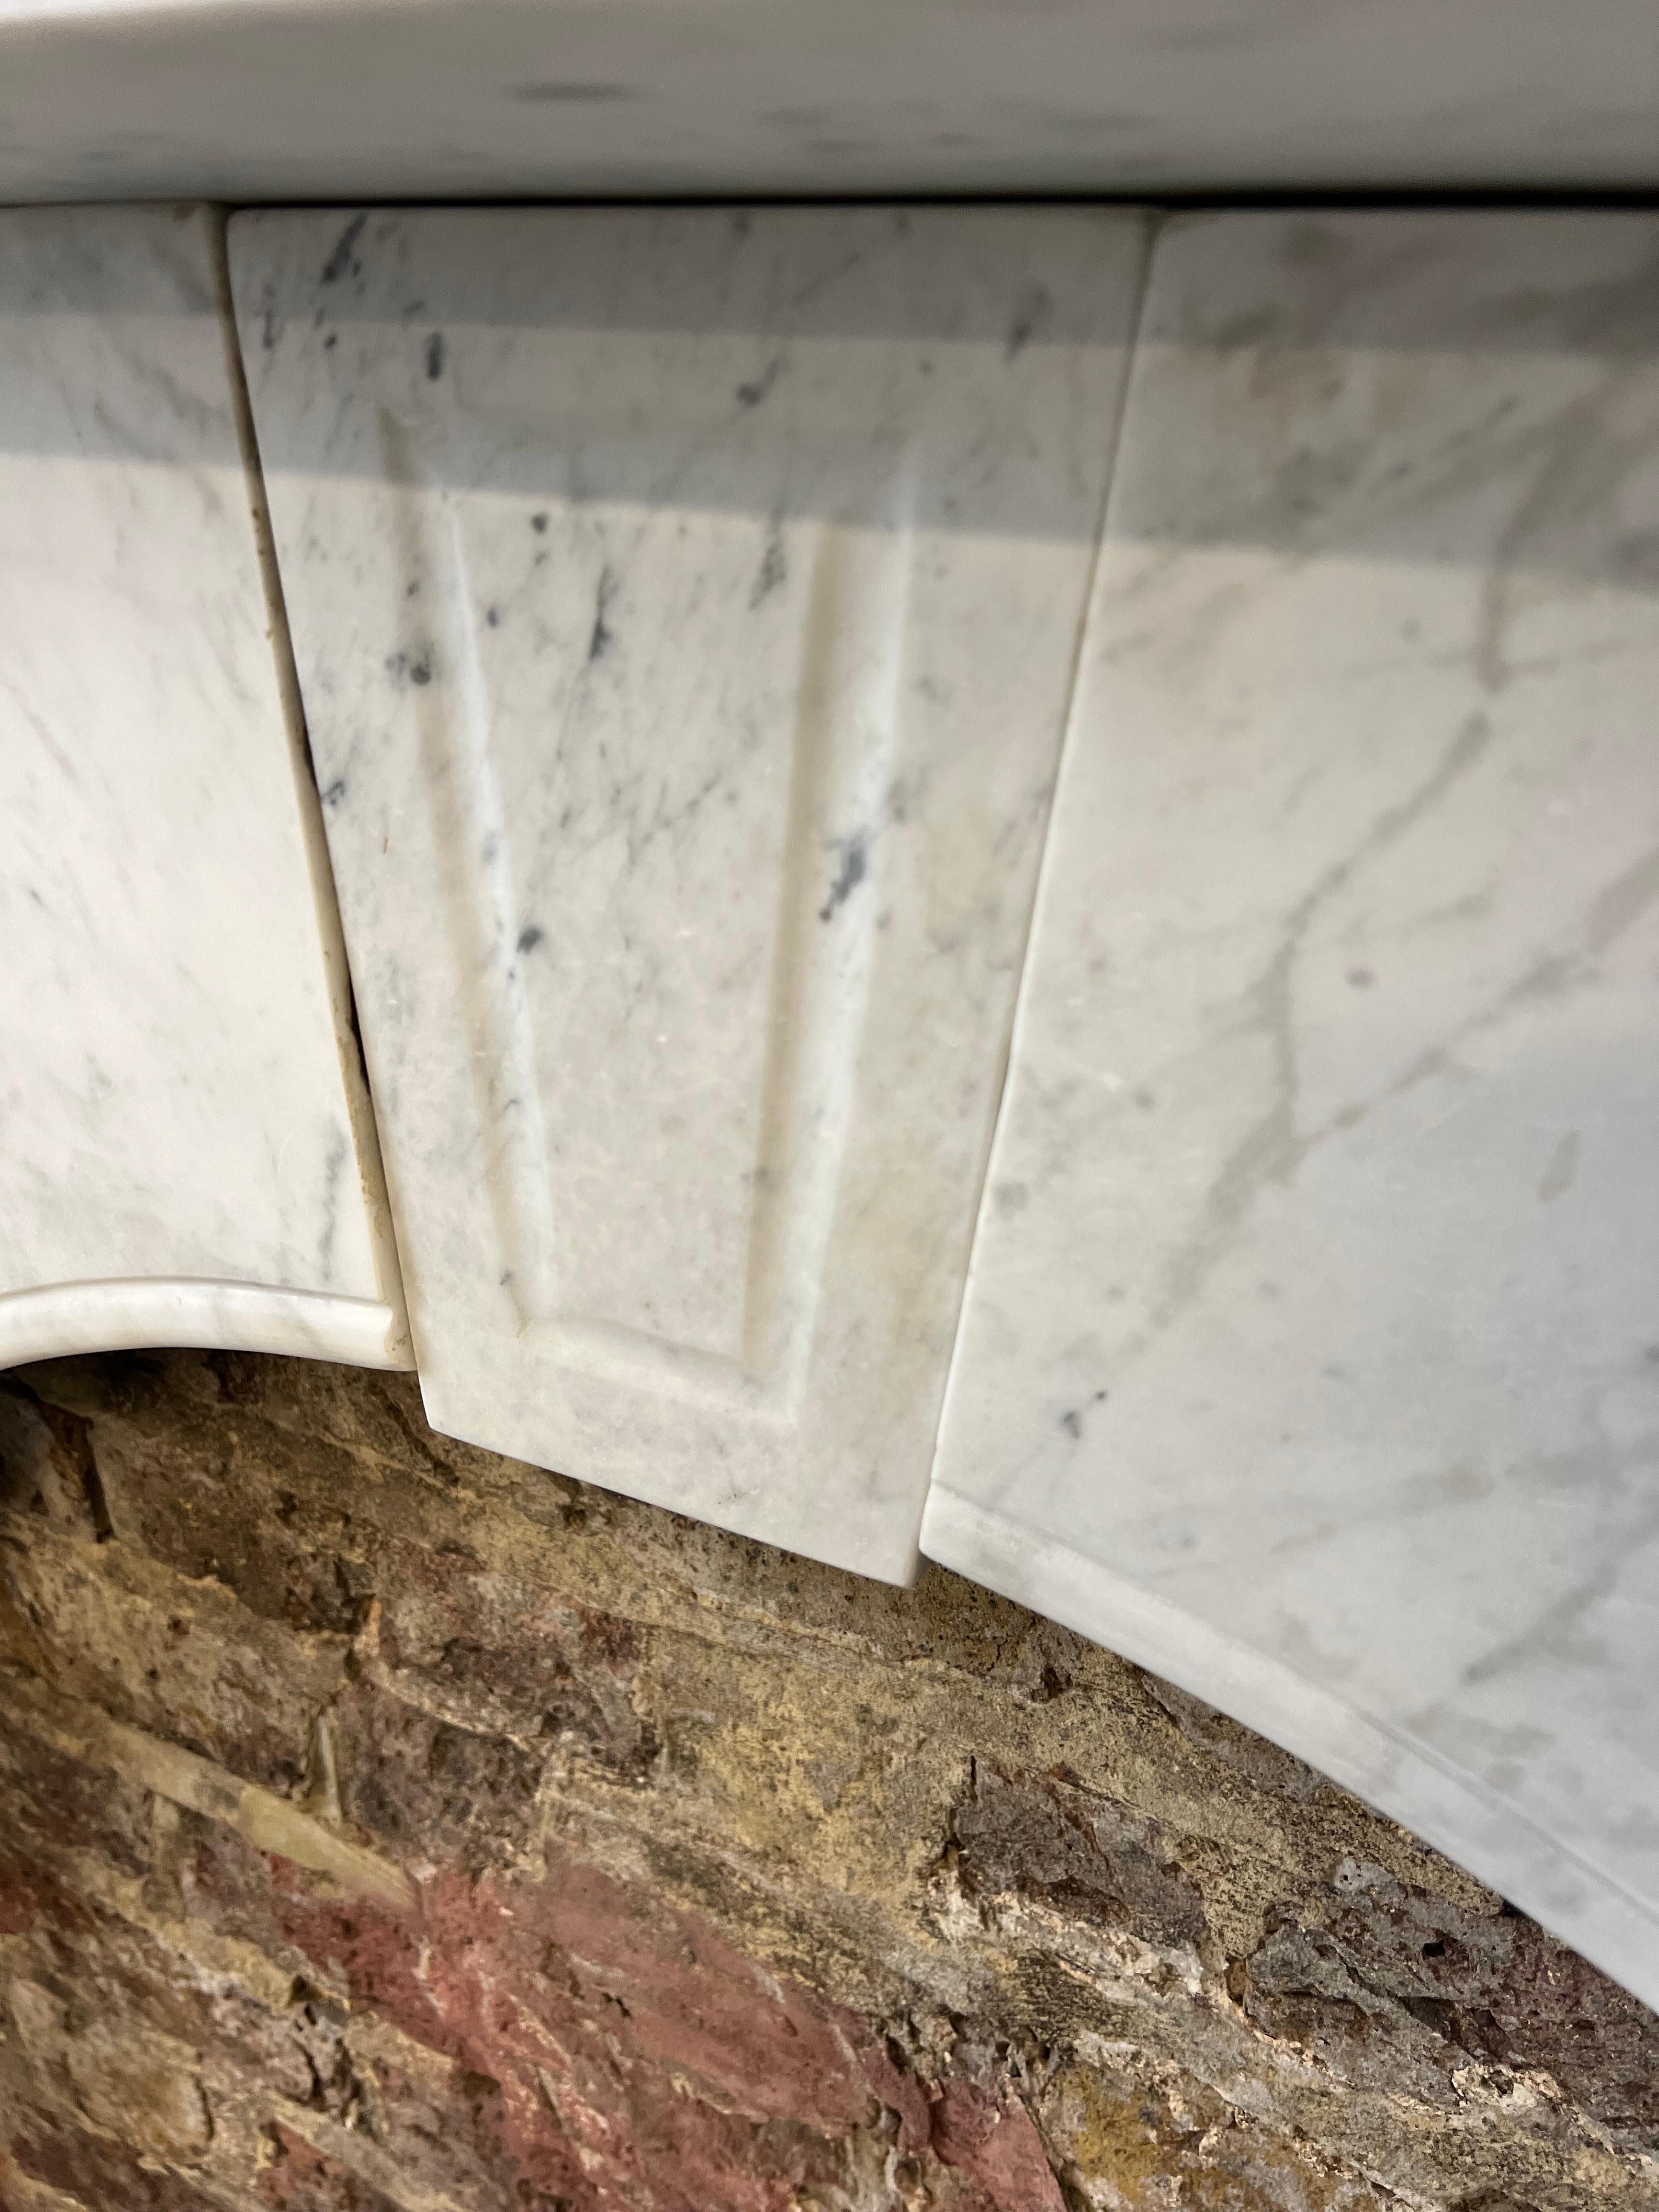 19th Century Victorian arched marble fireplace mantlepiece.
Late Georgian - Early Victorian Circa 1830 - 1850.
Am elegant antique carrara mable fireplace surround. 
With simply keystone & foot blocks. Stanard size and in good